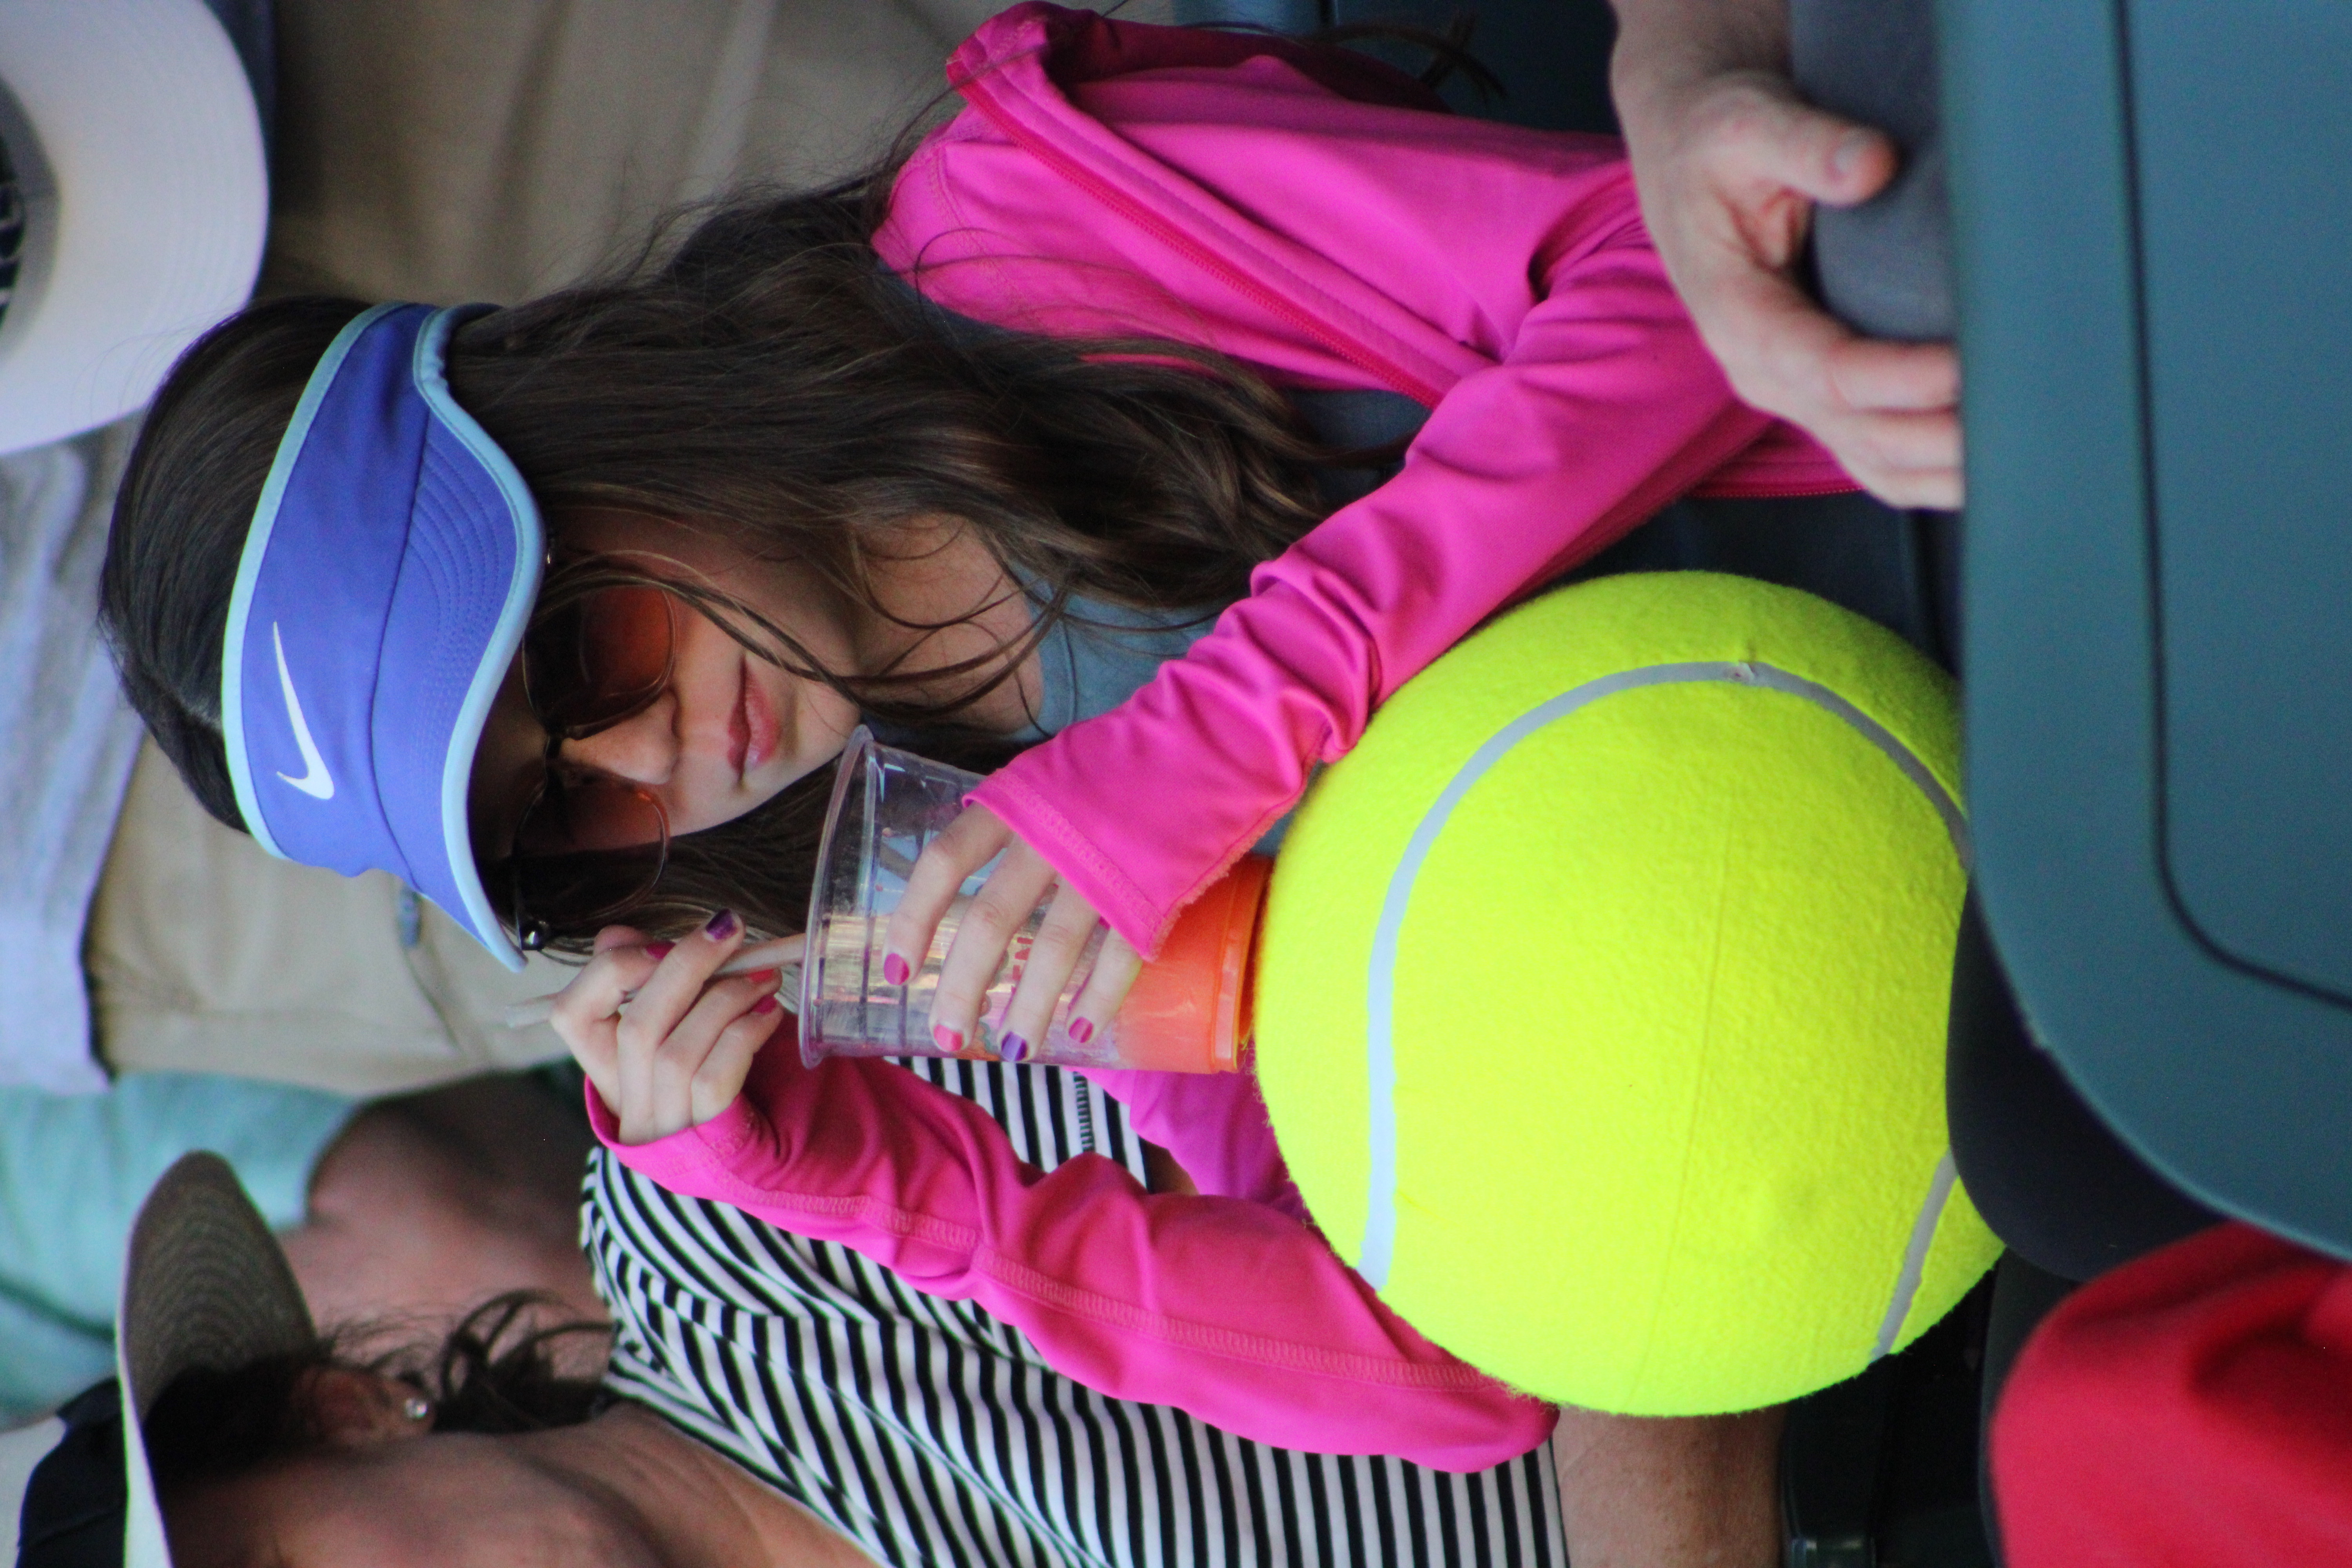 Young girl spectator with her oversized tennis ball and stirring her beverage.